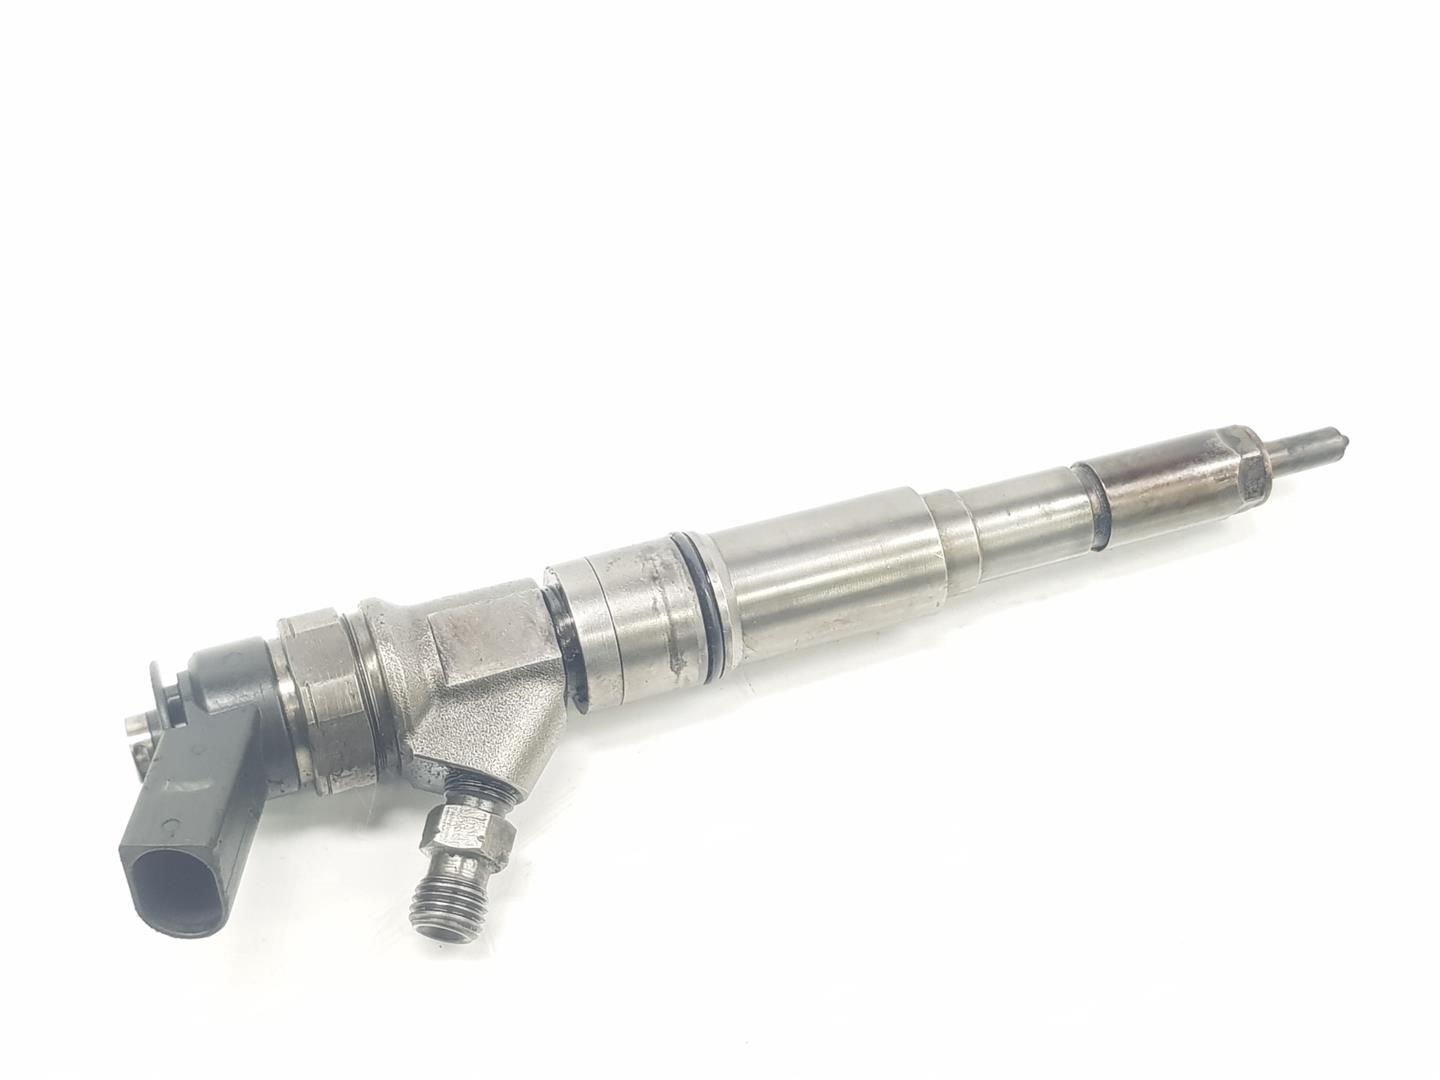 BMW 3 Series E46 (1997-2006) Fuel Injector 13537793836, 13537793836, 1111AA 22963246